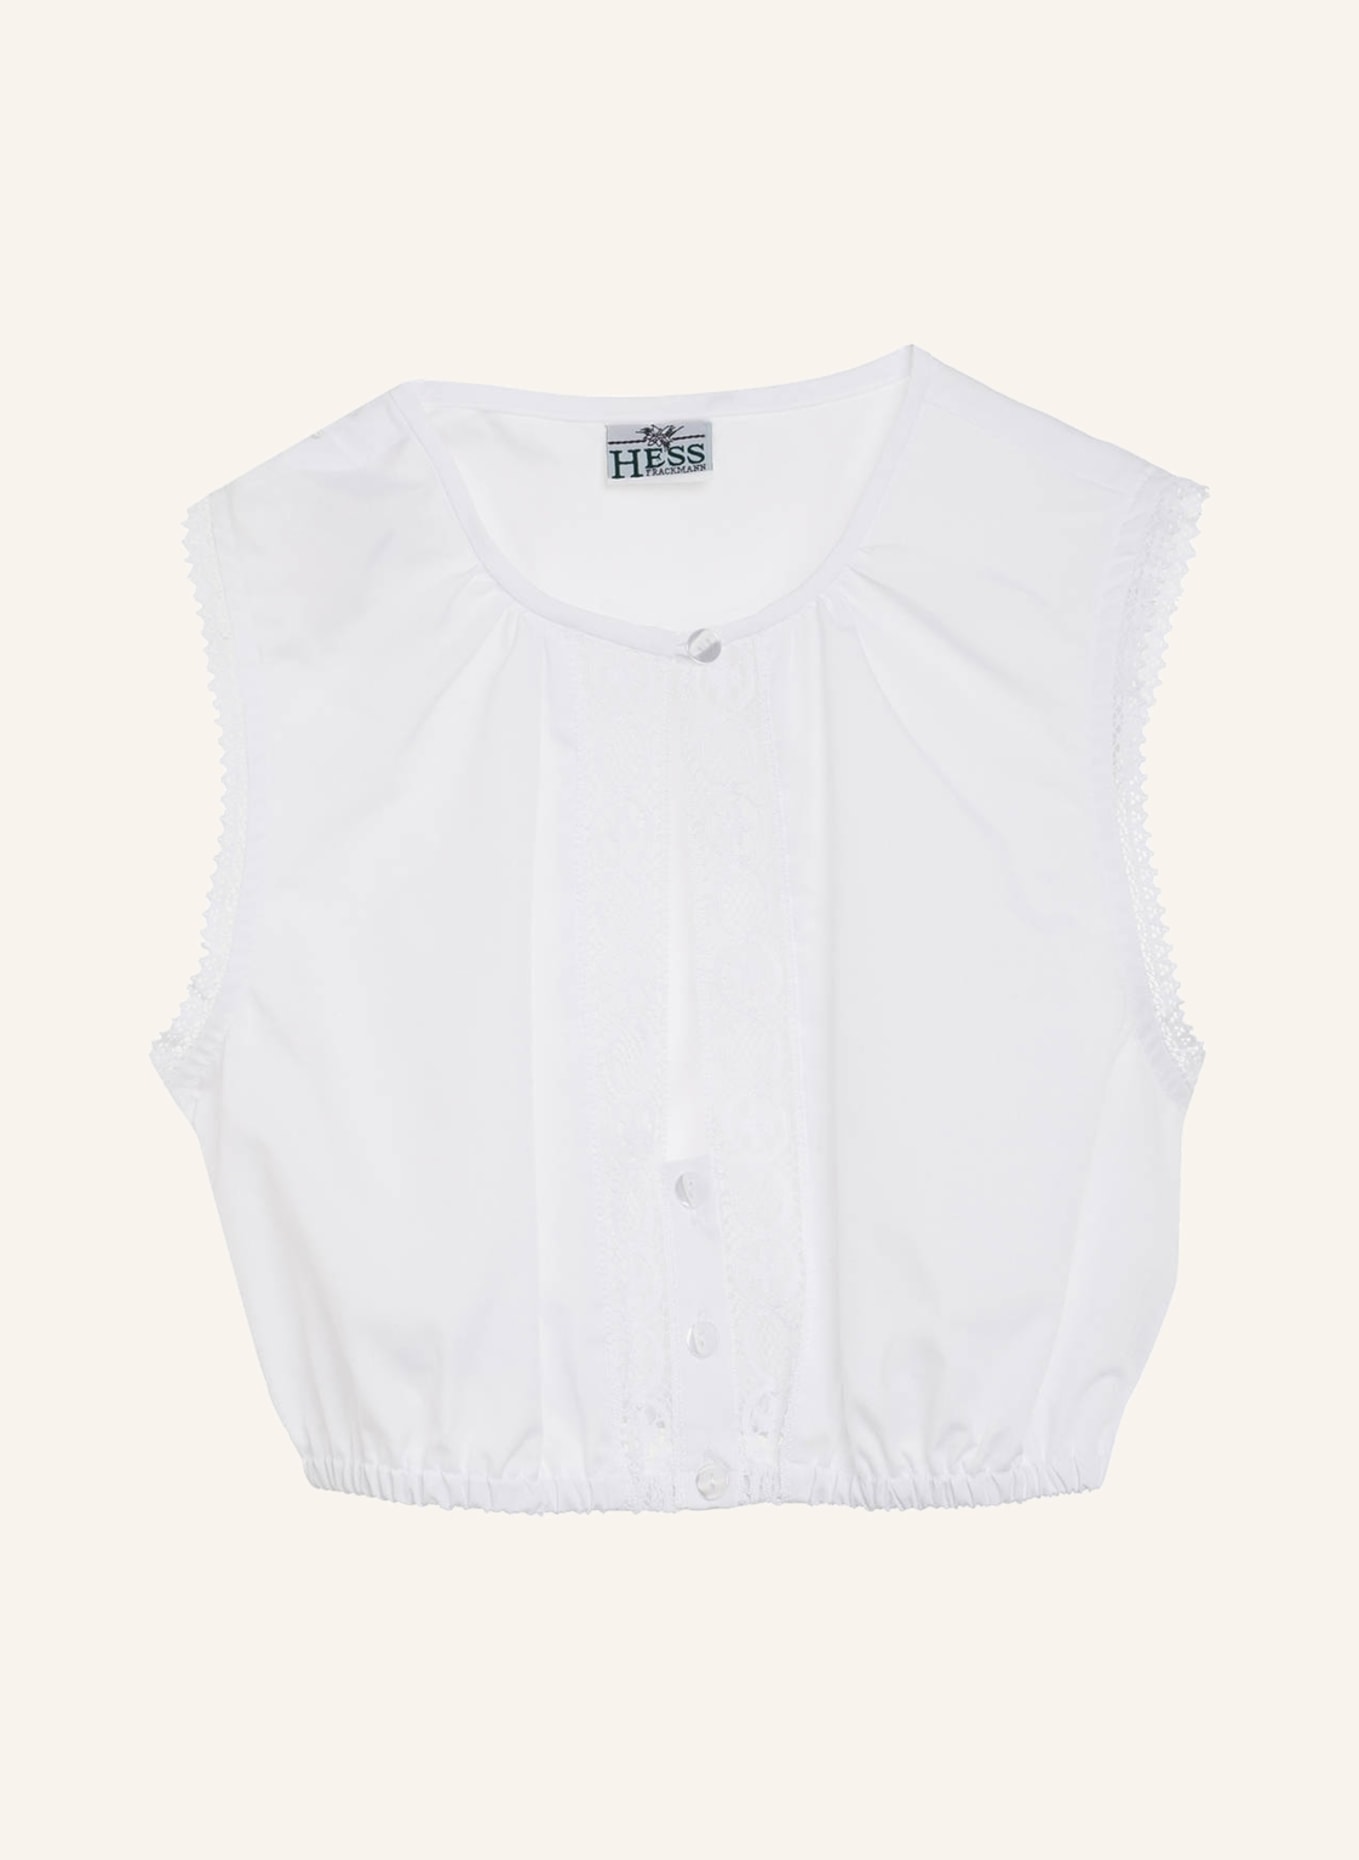 BERWIN & WOLFF Dirndl blouse with lace insert, Color: WHITE (Image 1)